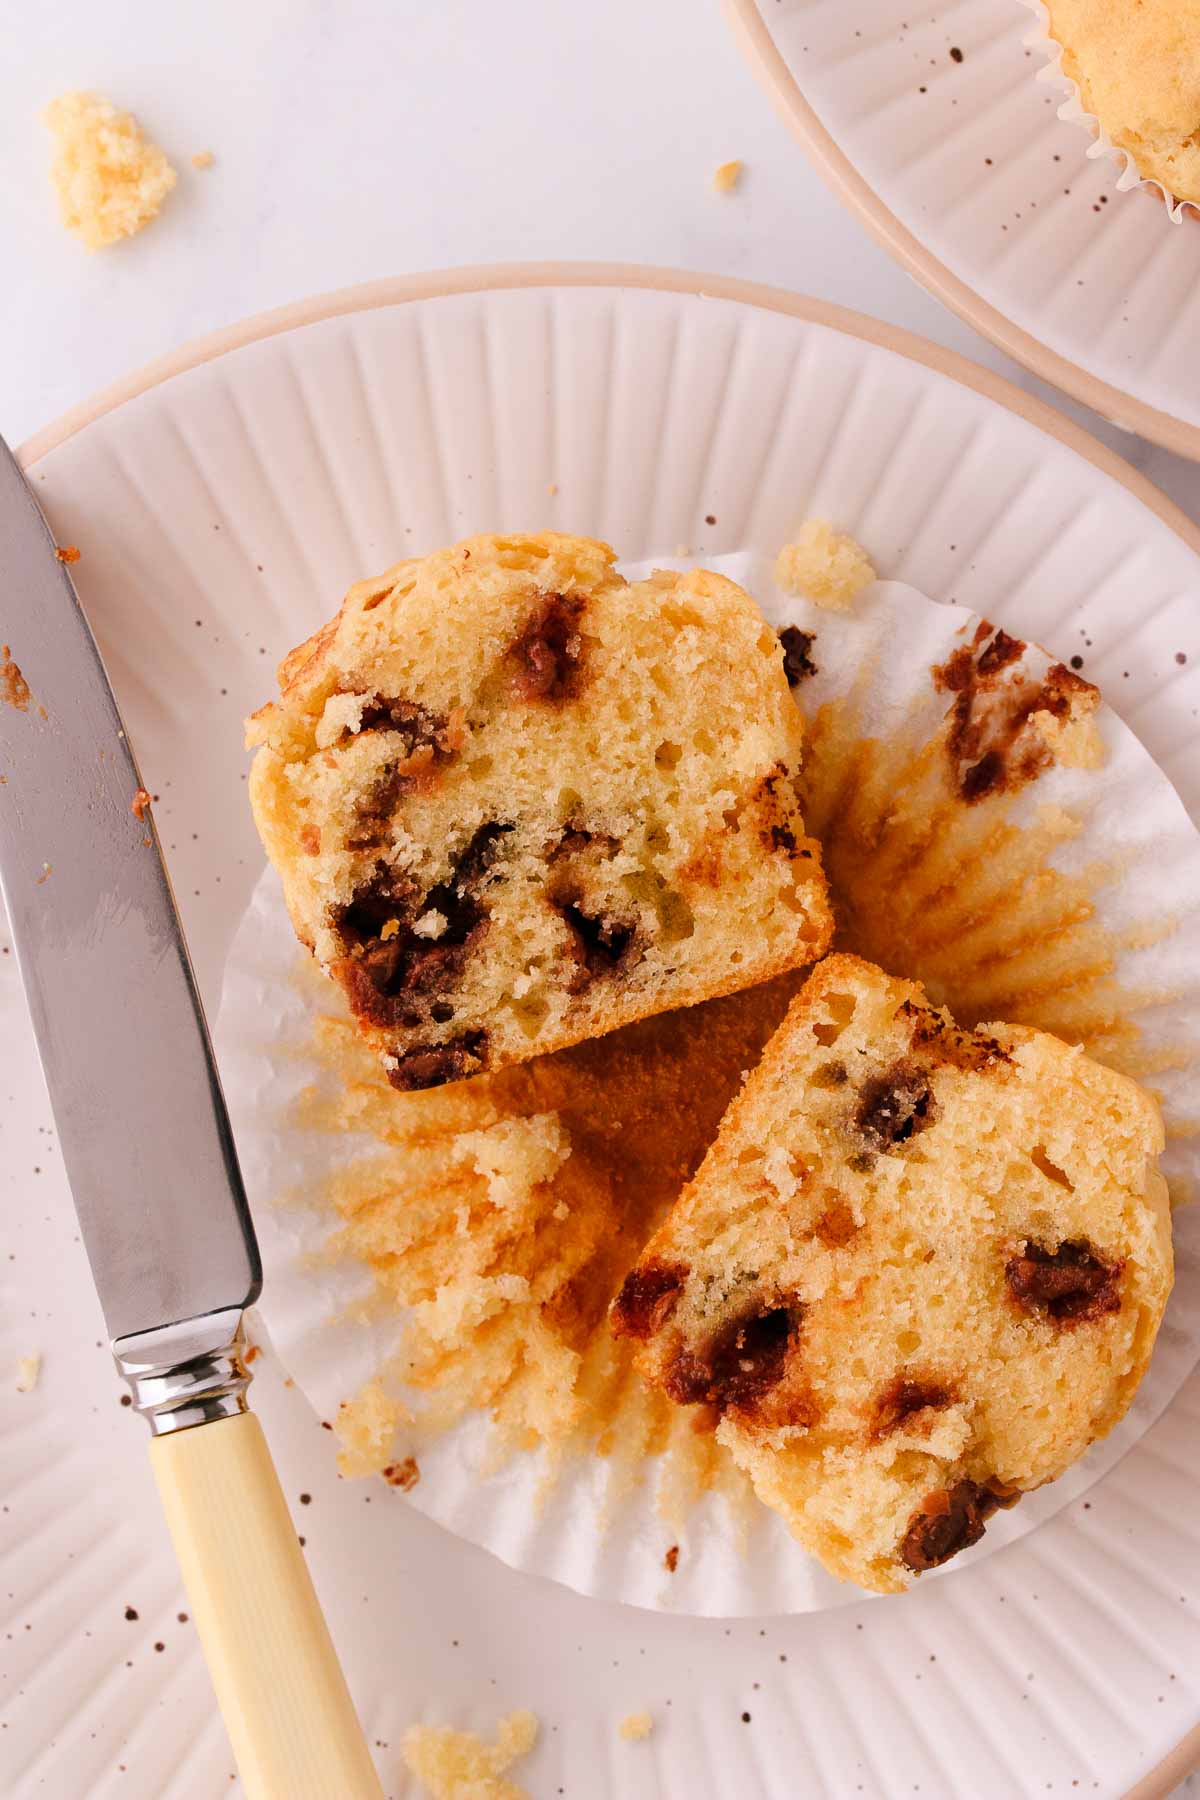 A halved chocolate chip muffin showing the fluffy texture, on a white ridged plate, with a bone-handled knife.